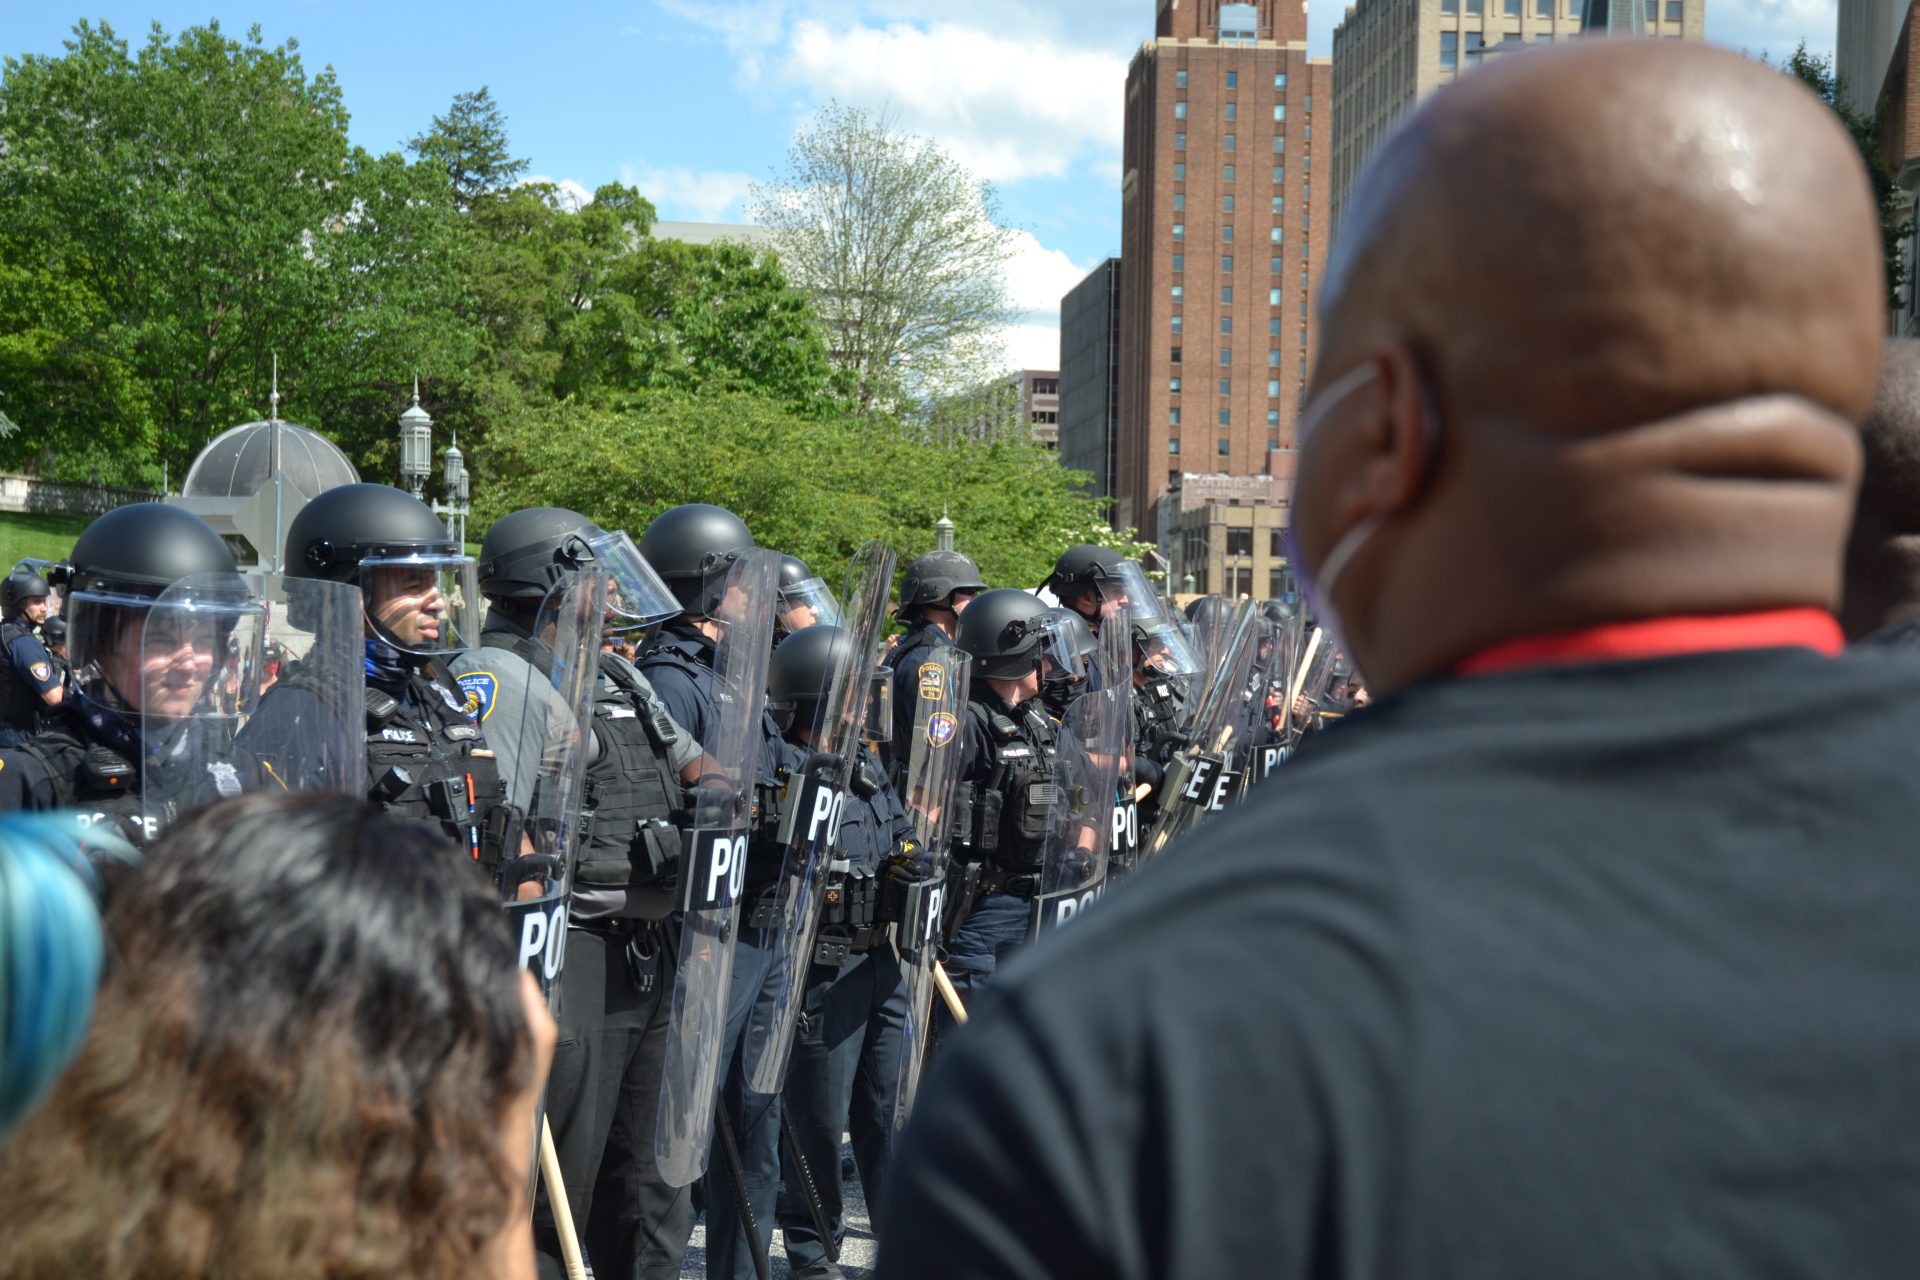 A protester stands in front of police in riot gear in Harrisburg Sat., May 30, 2020.